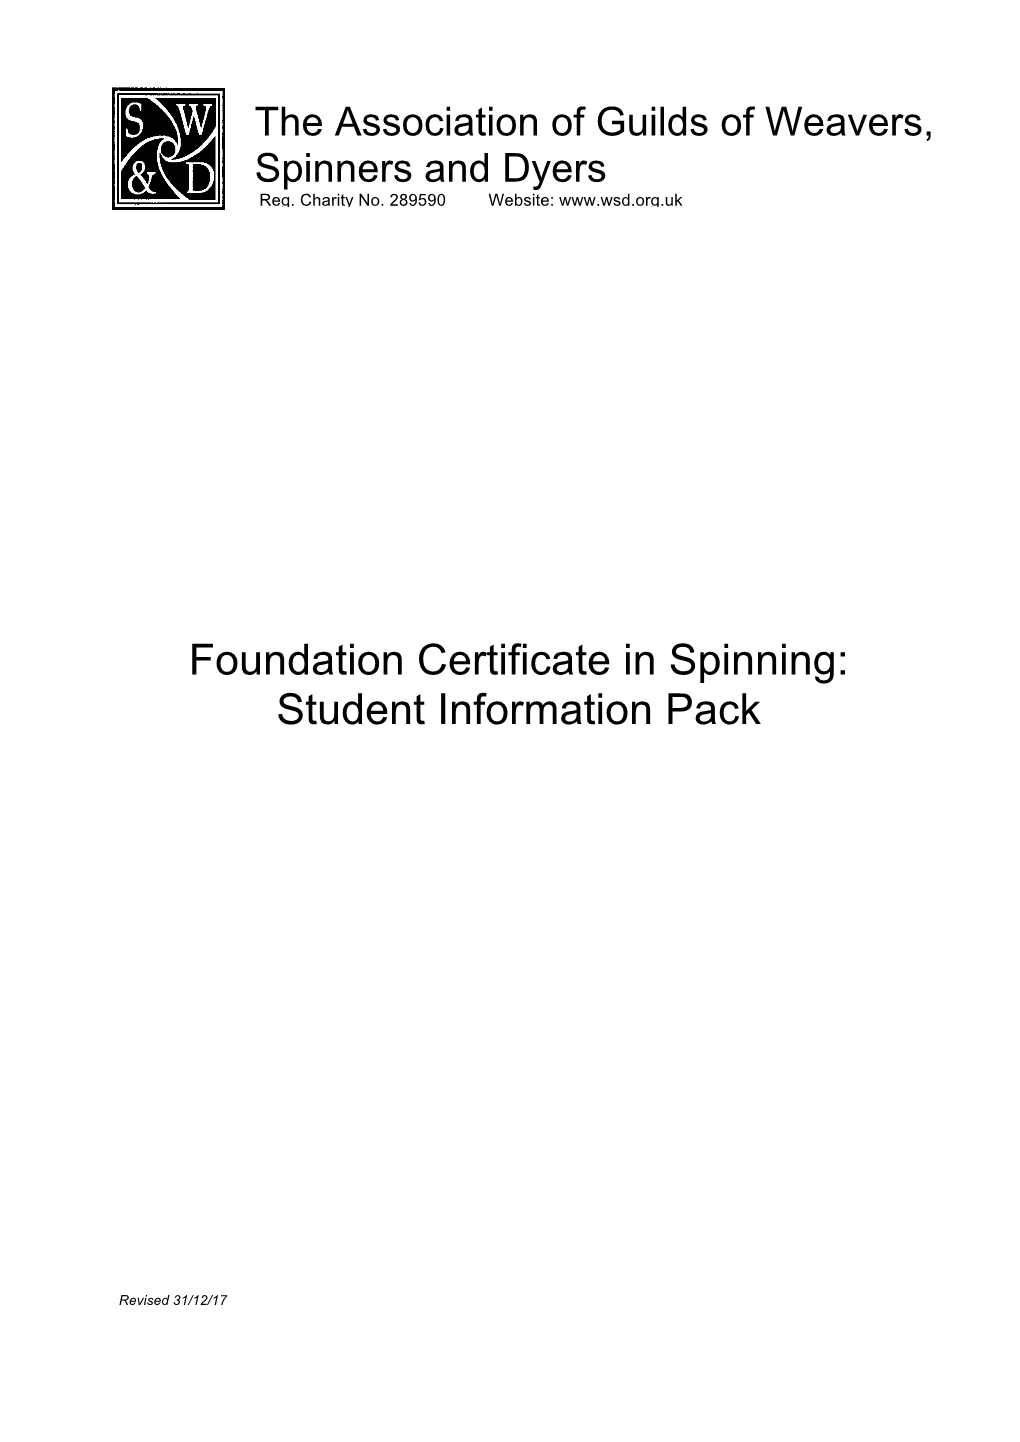 Foundation Certificate in Spinning: Student Information Pack